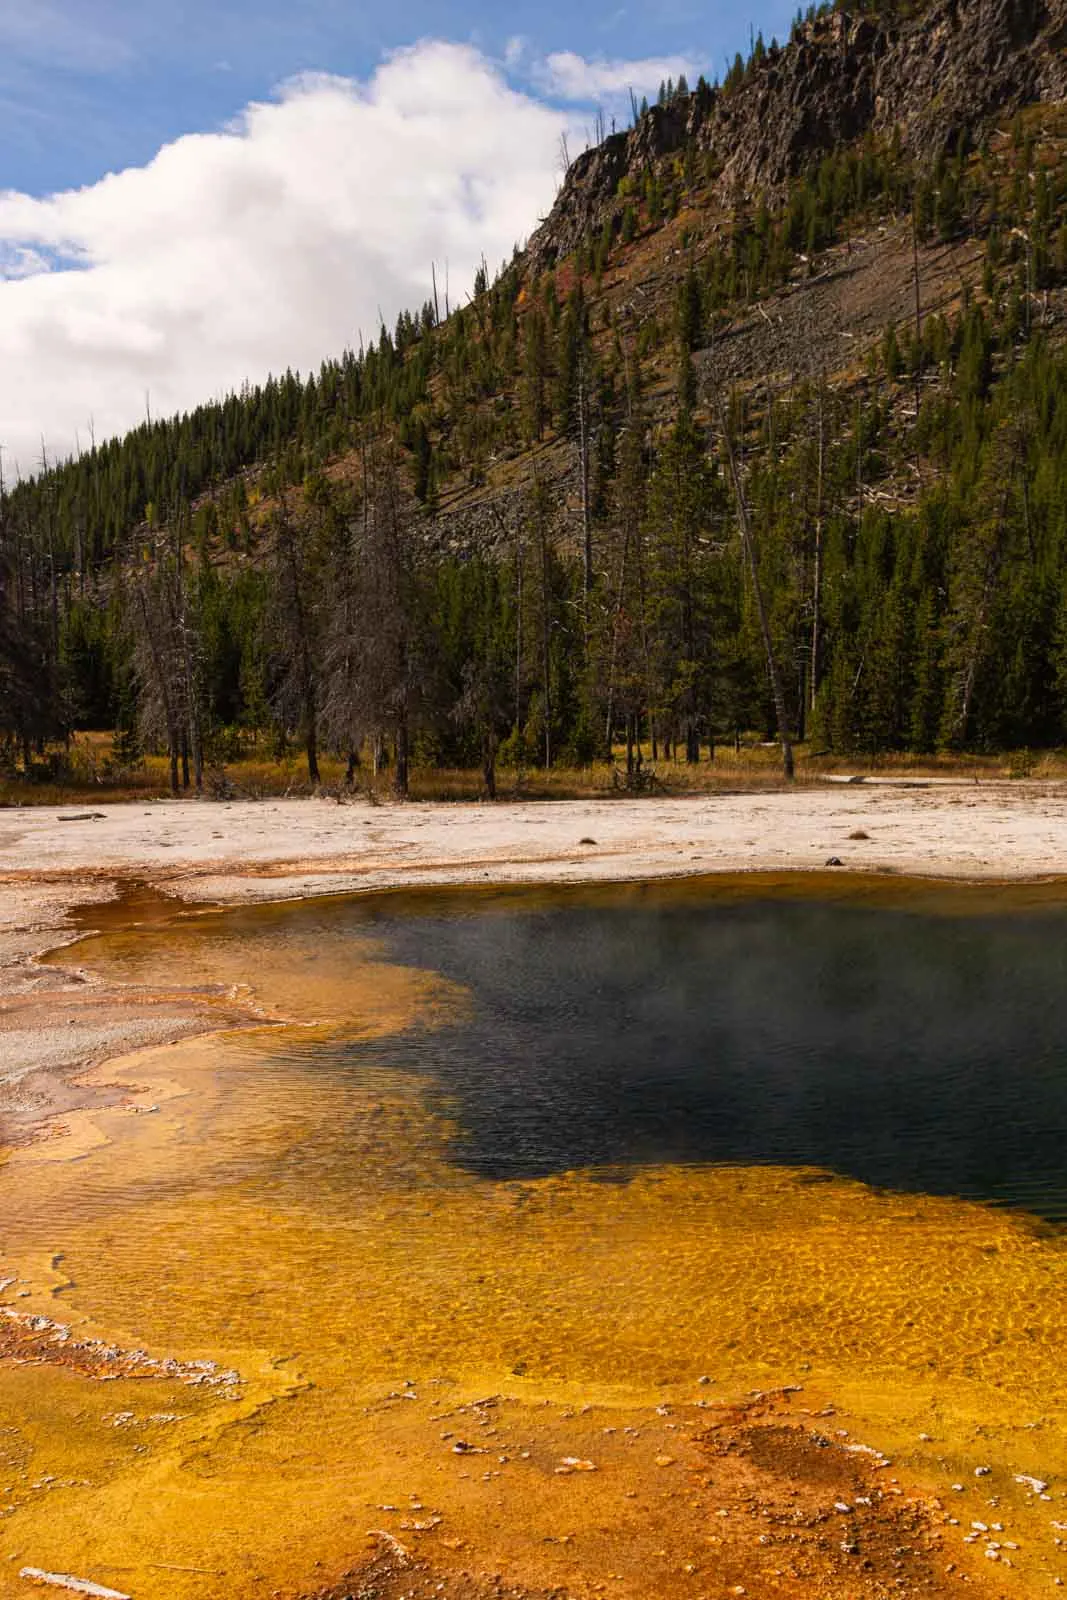 A view of Black Sand Basin - one of the many things to do in Yellowstone